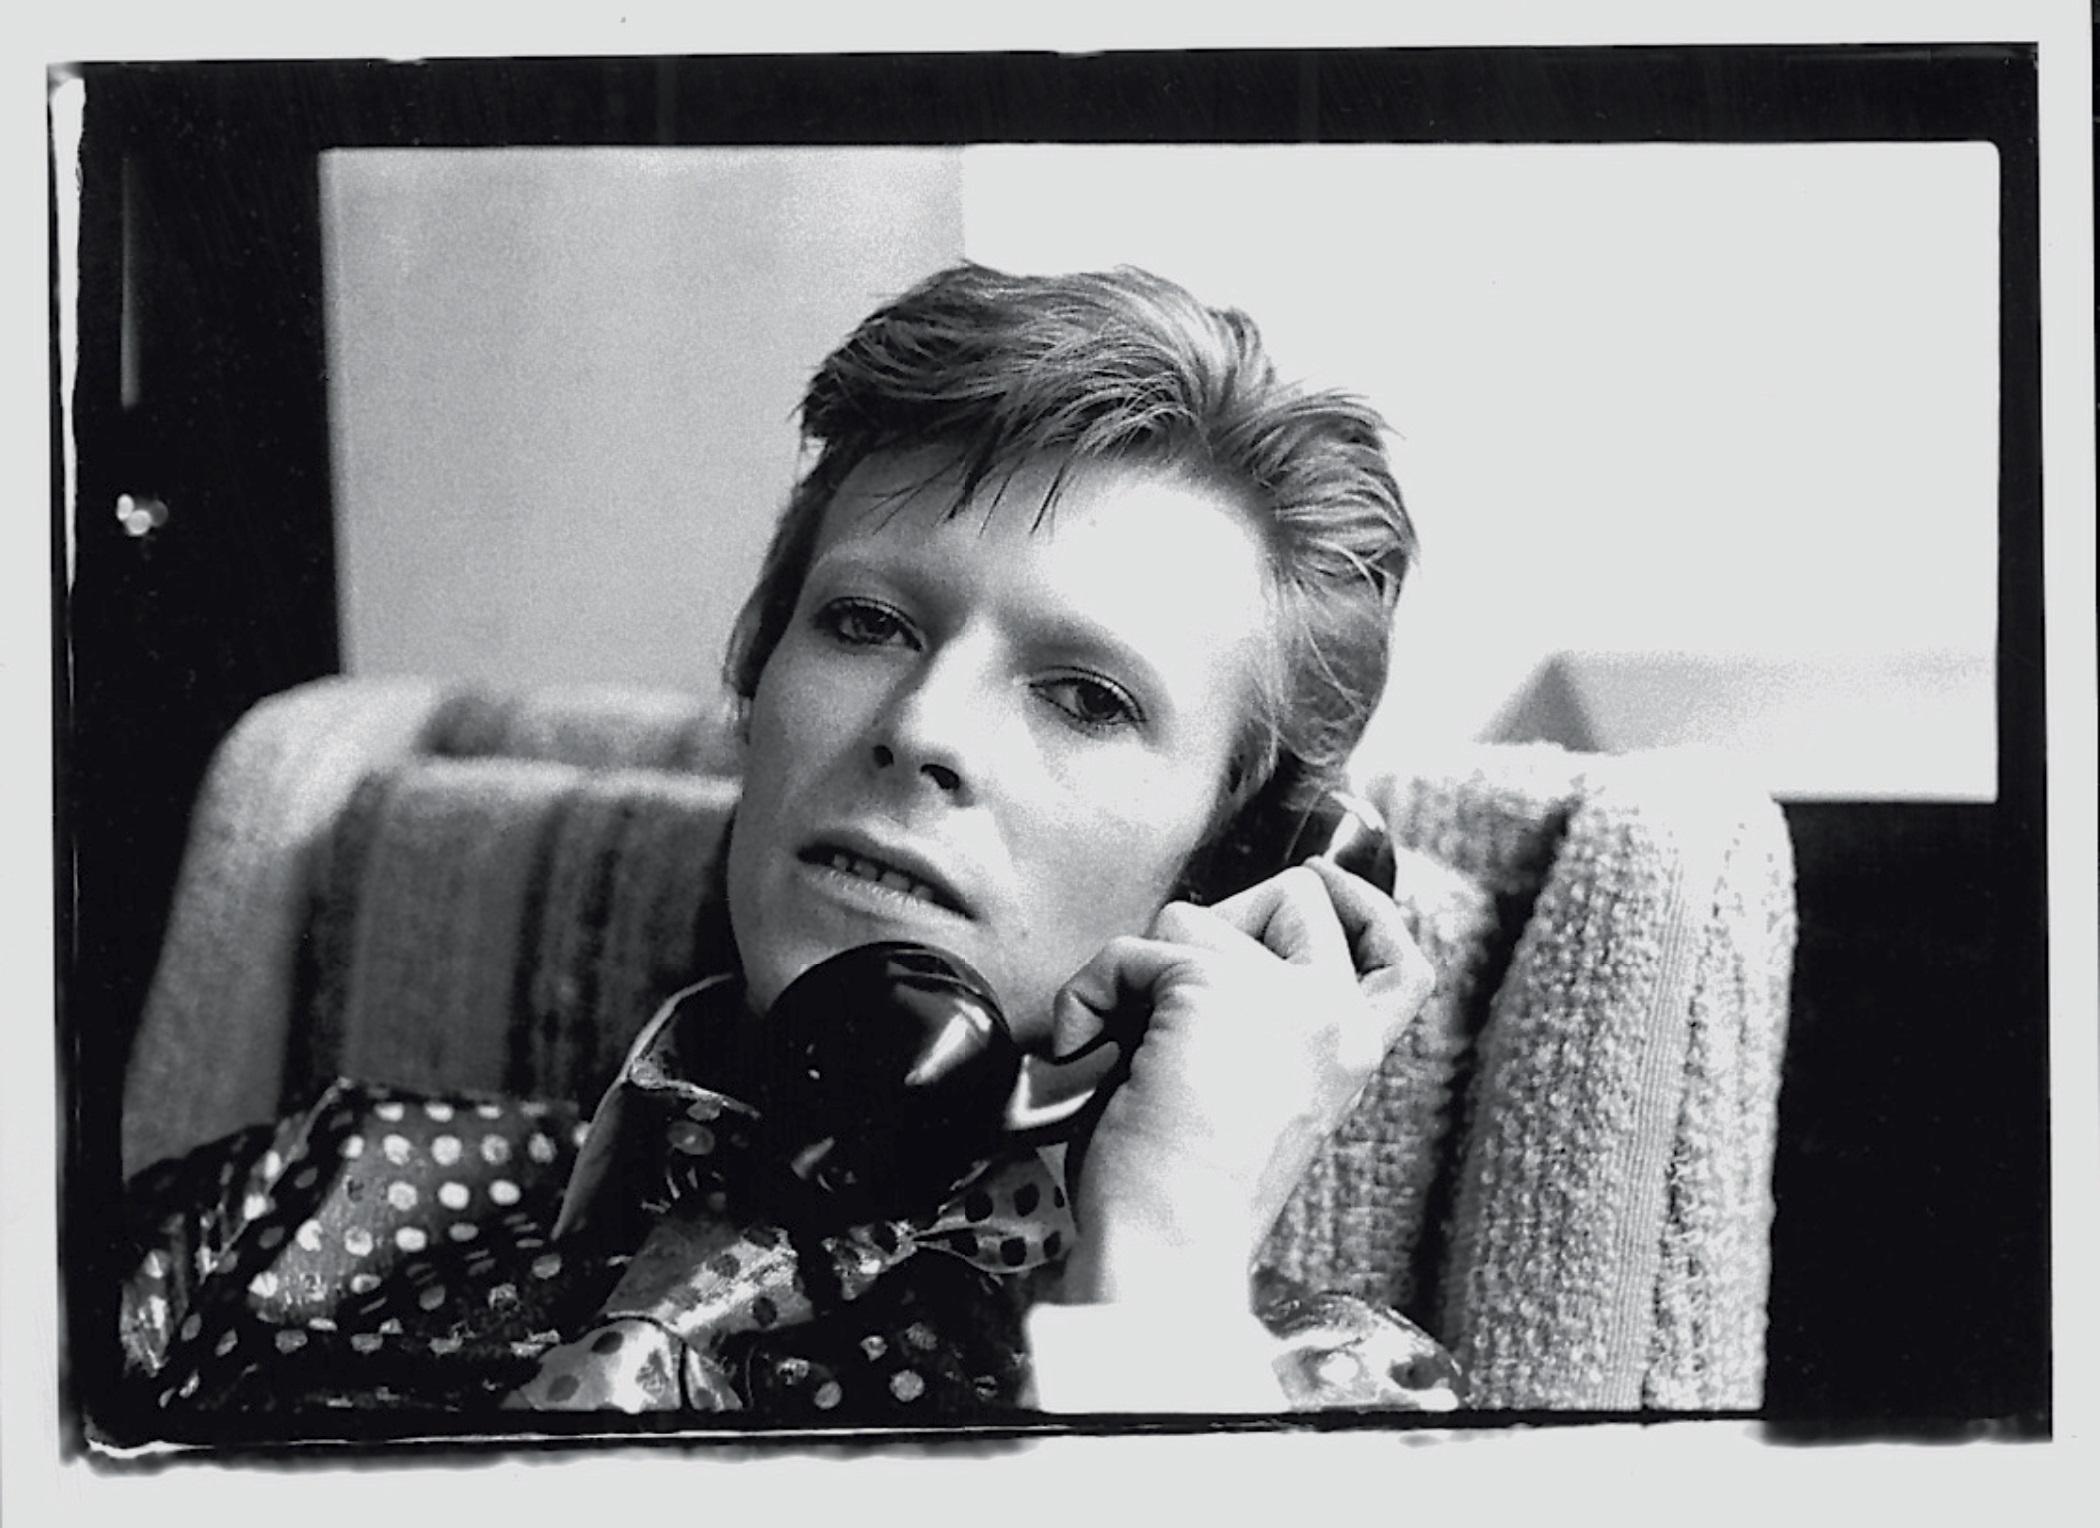 Bowie On The Phone - signed limited edition print 

David Bowie talking on the phone, 1973. (photo Mick Rock)

paper size : 20x24 inches / 61 x 51 cm

Stamped and numbered by the Estate.

Archival pigment print.

edition of 50 only this size